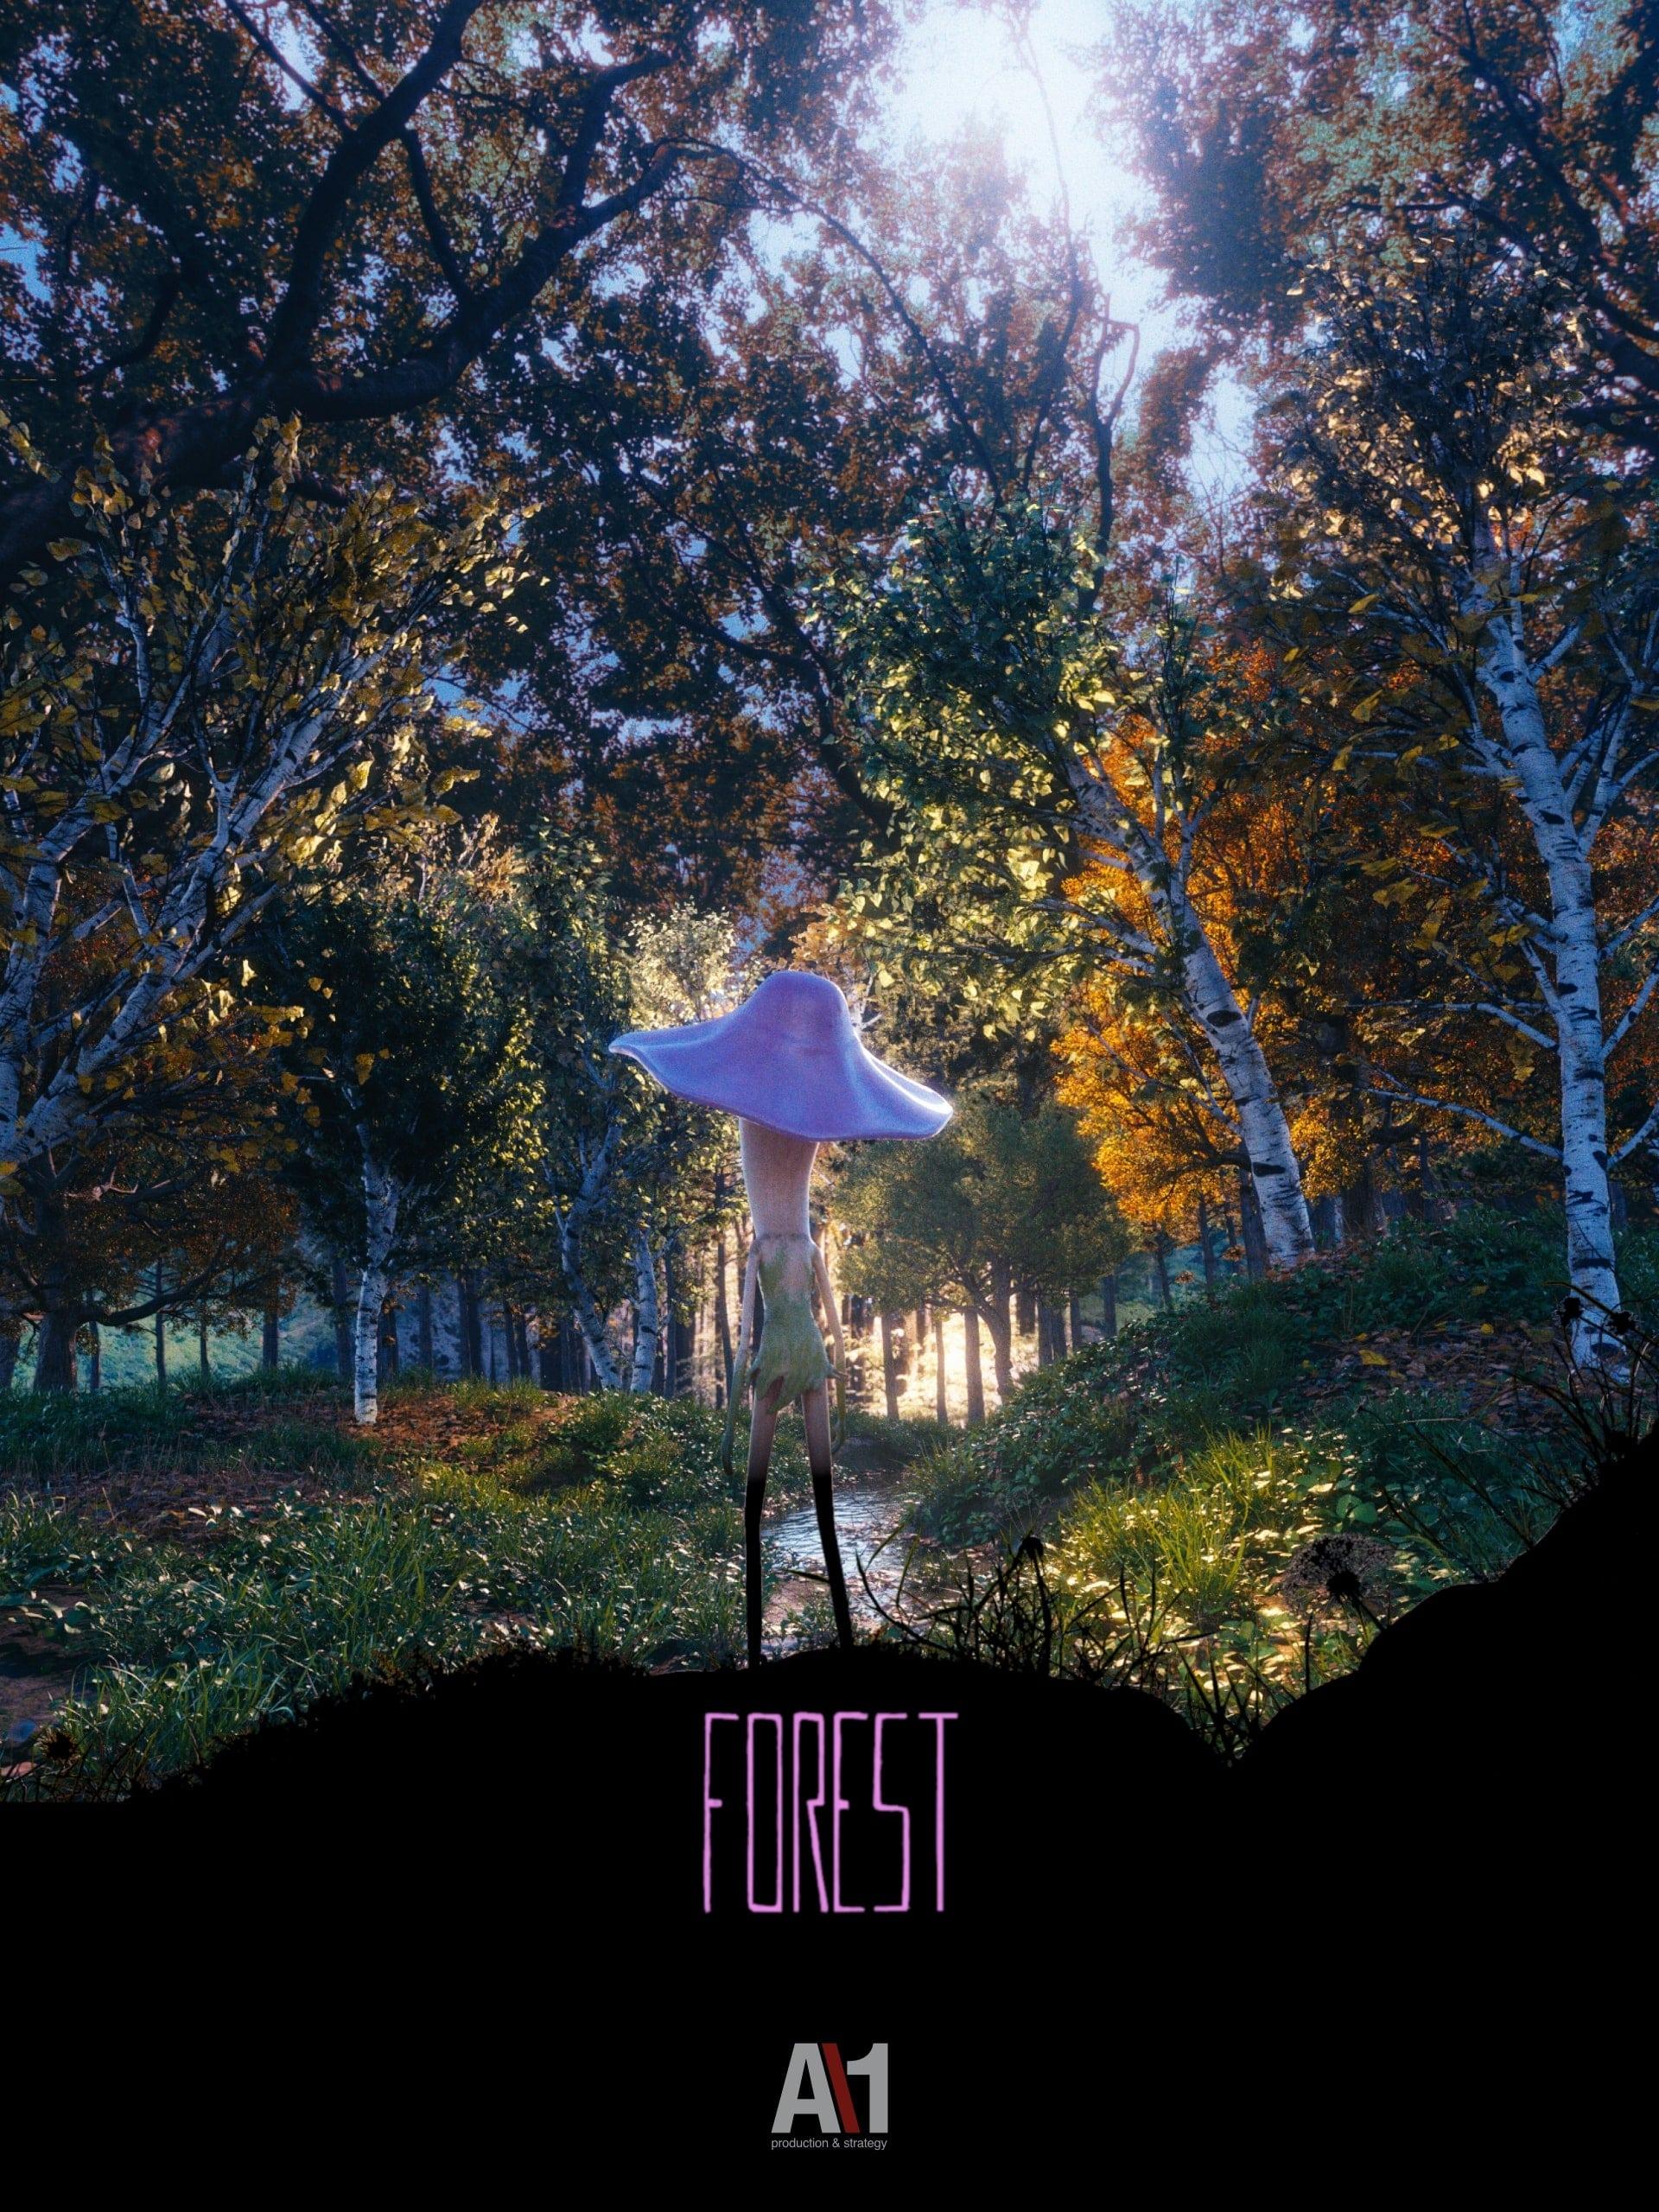 Forest poster